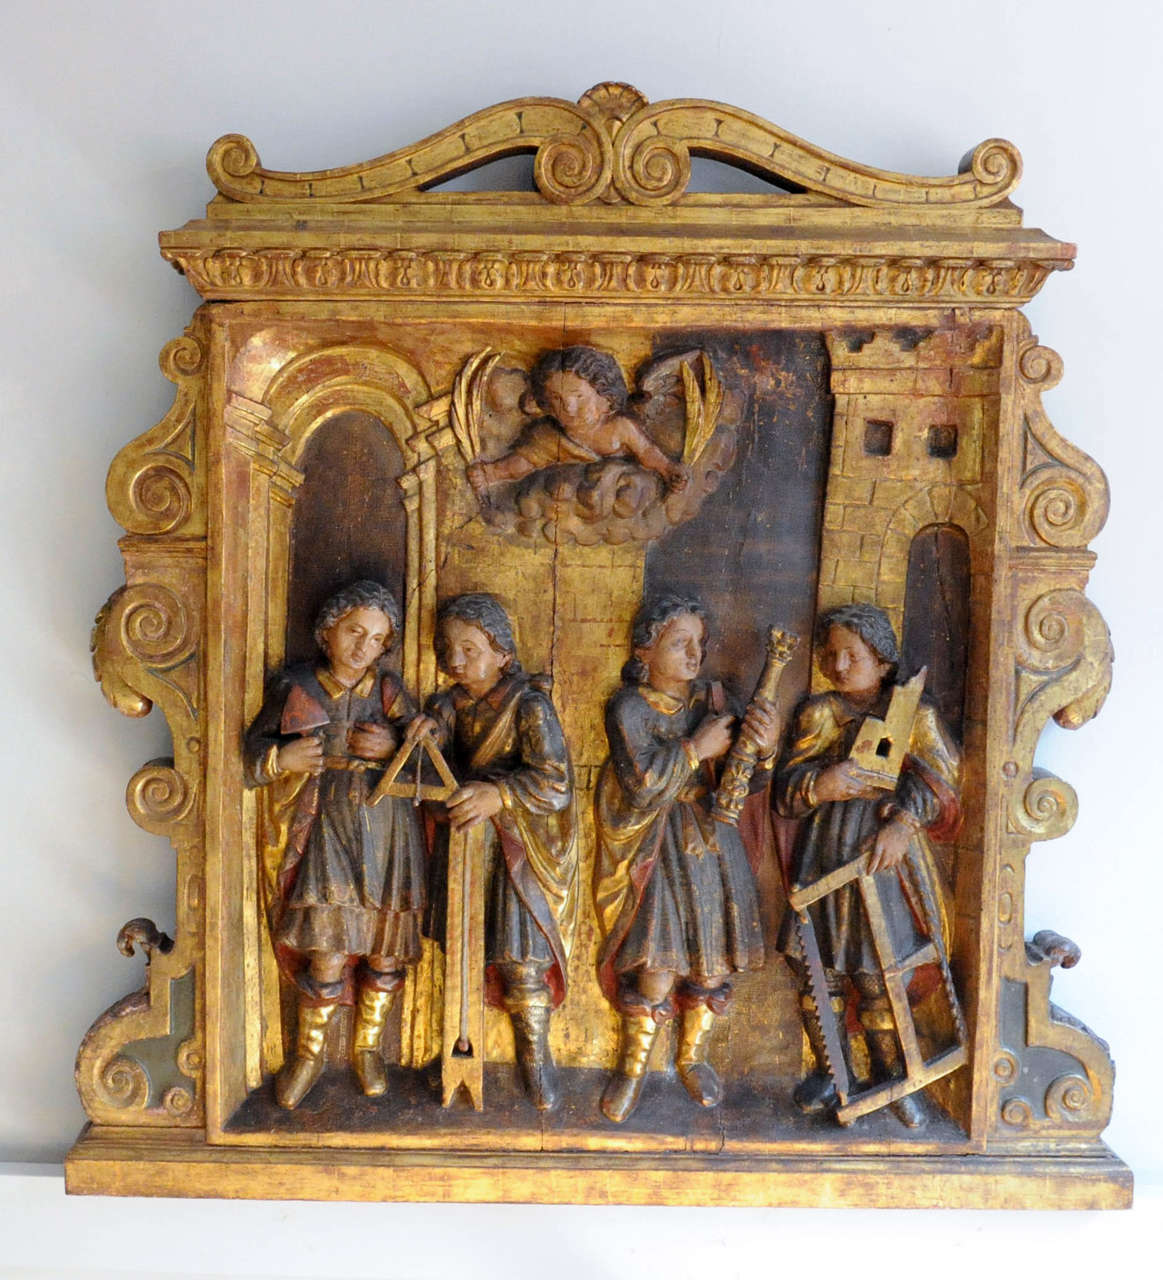 original estofado polychromy on oak

Depicting from left to right, a stone mason, an architect, a sculptor and a carpenter, the quattro Coronati, patron saints of builders and masons. This relief possibly was part of an altar that was commissioned